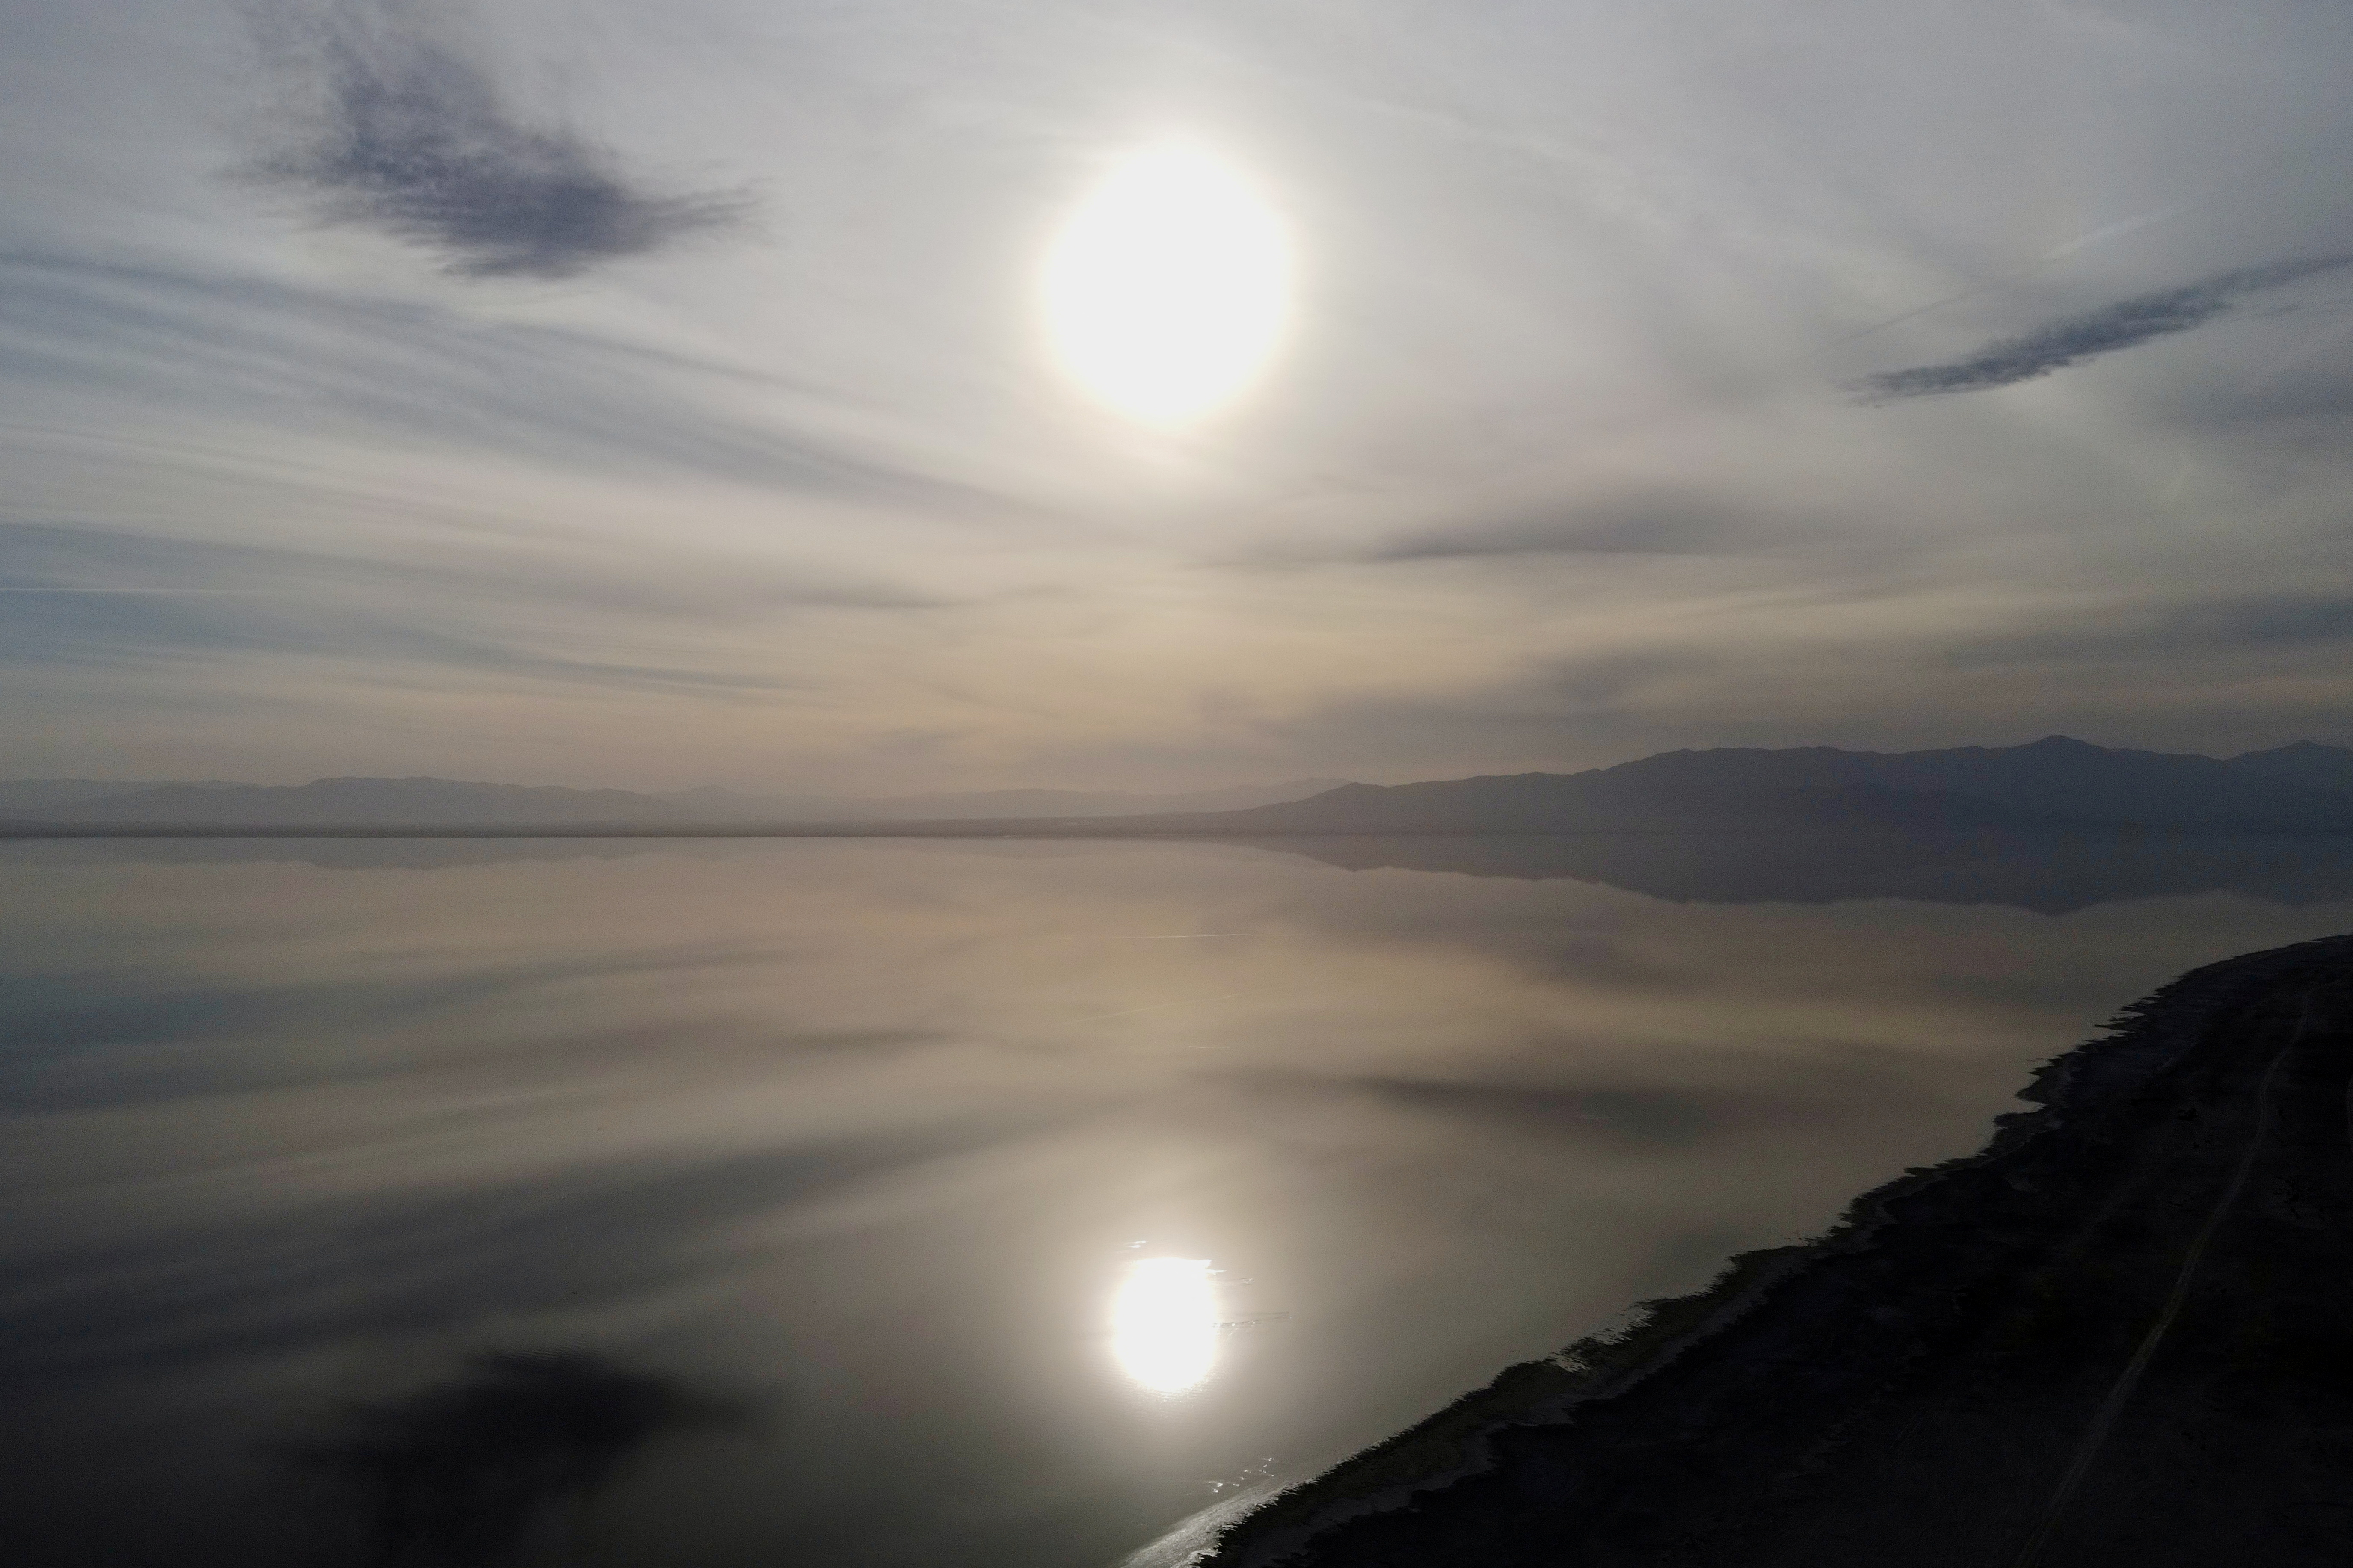 Sunset is reflected in the Salton Sea as seen from Bombay Beach